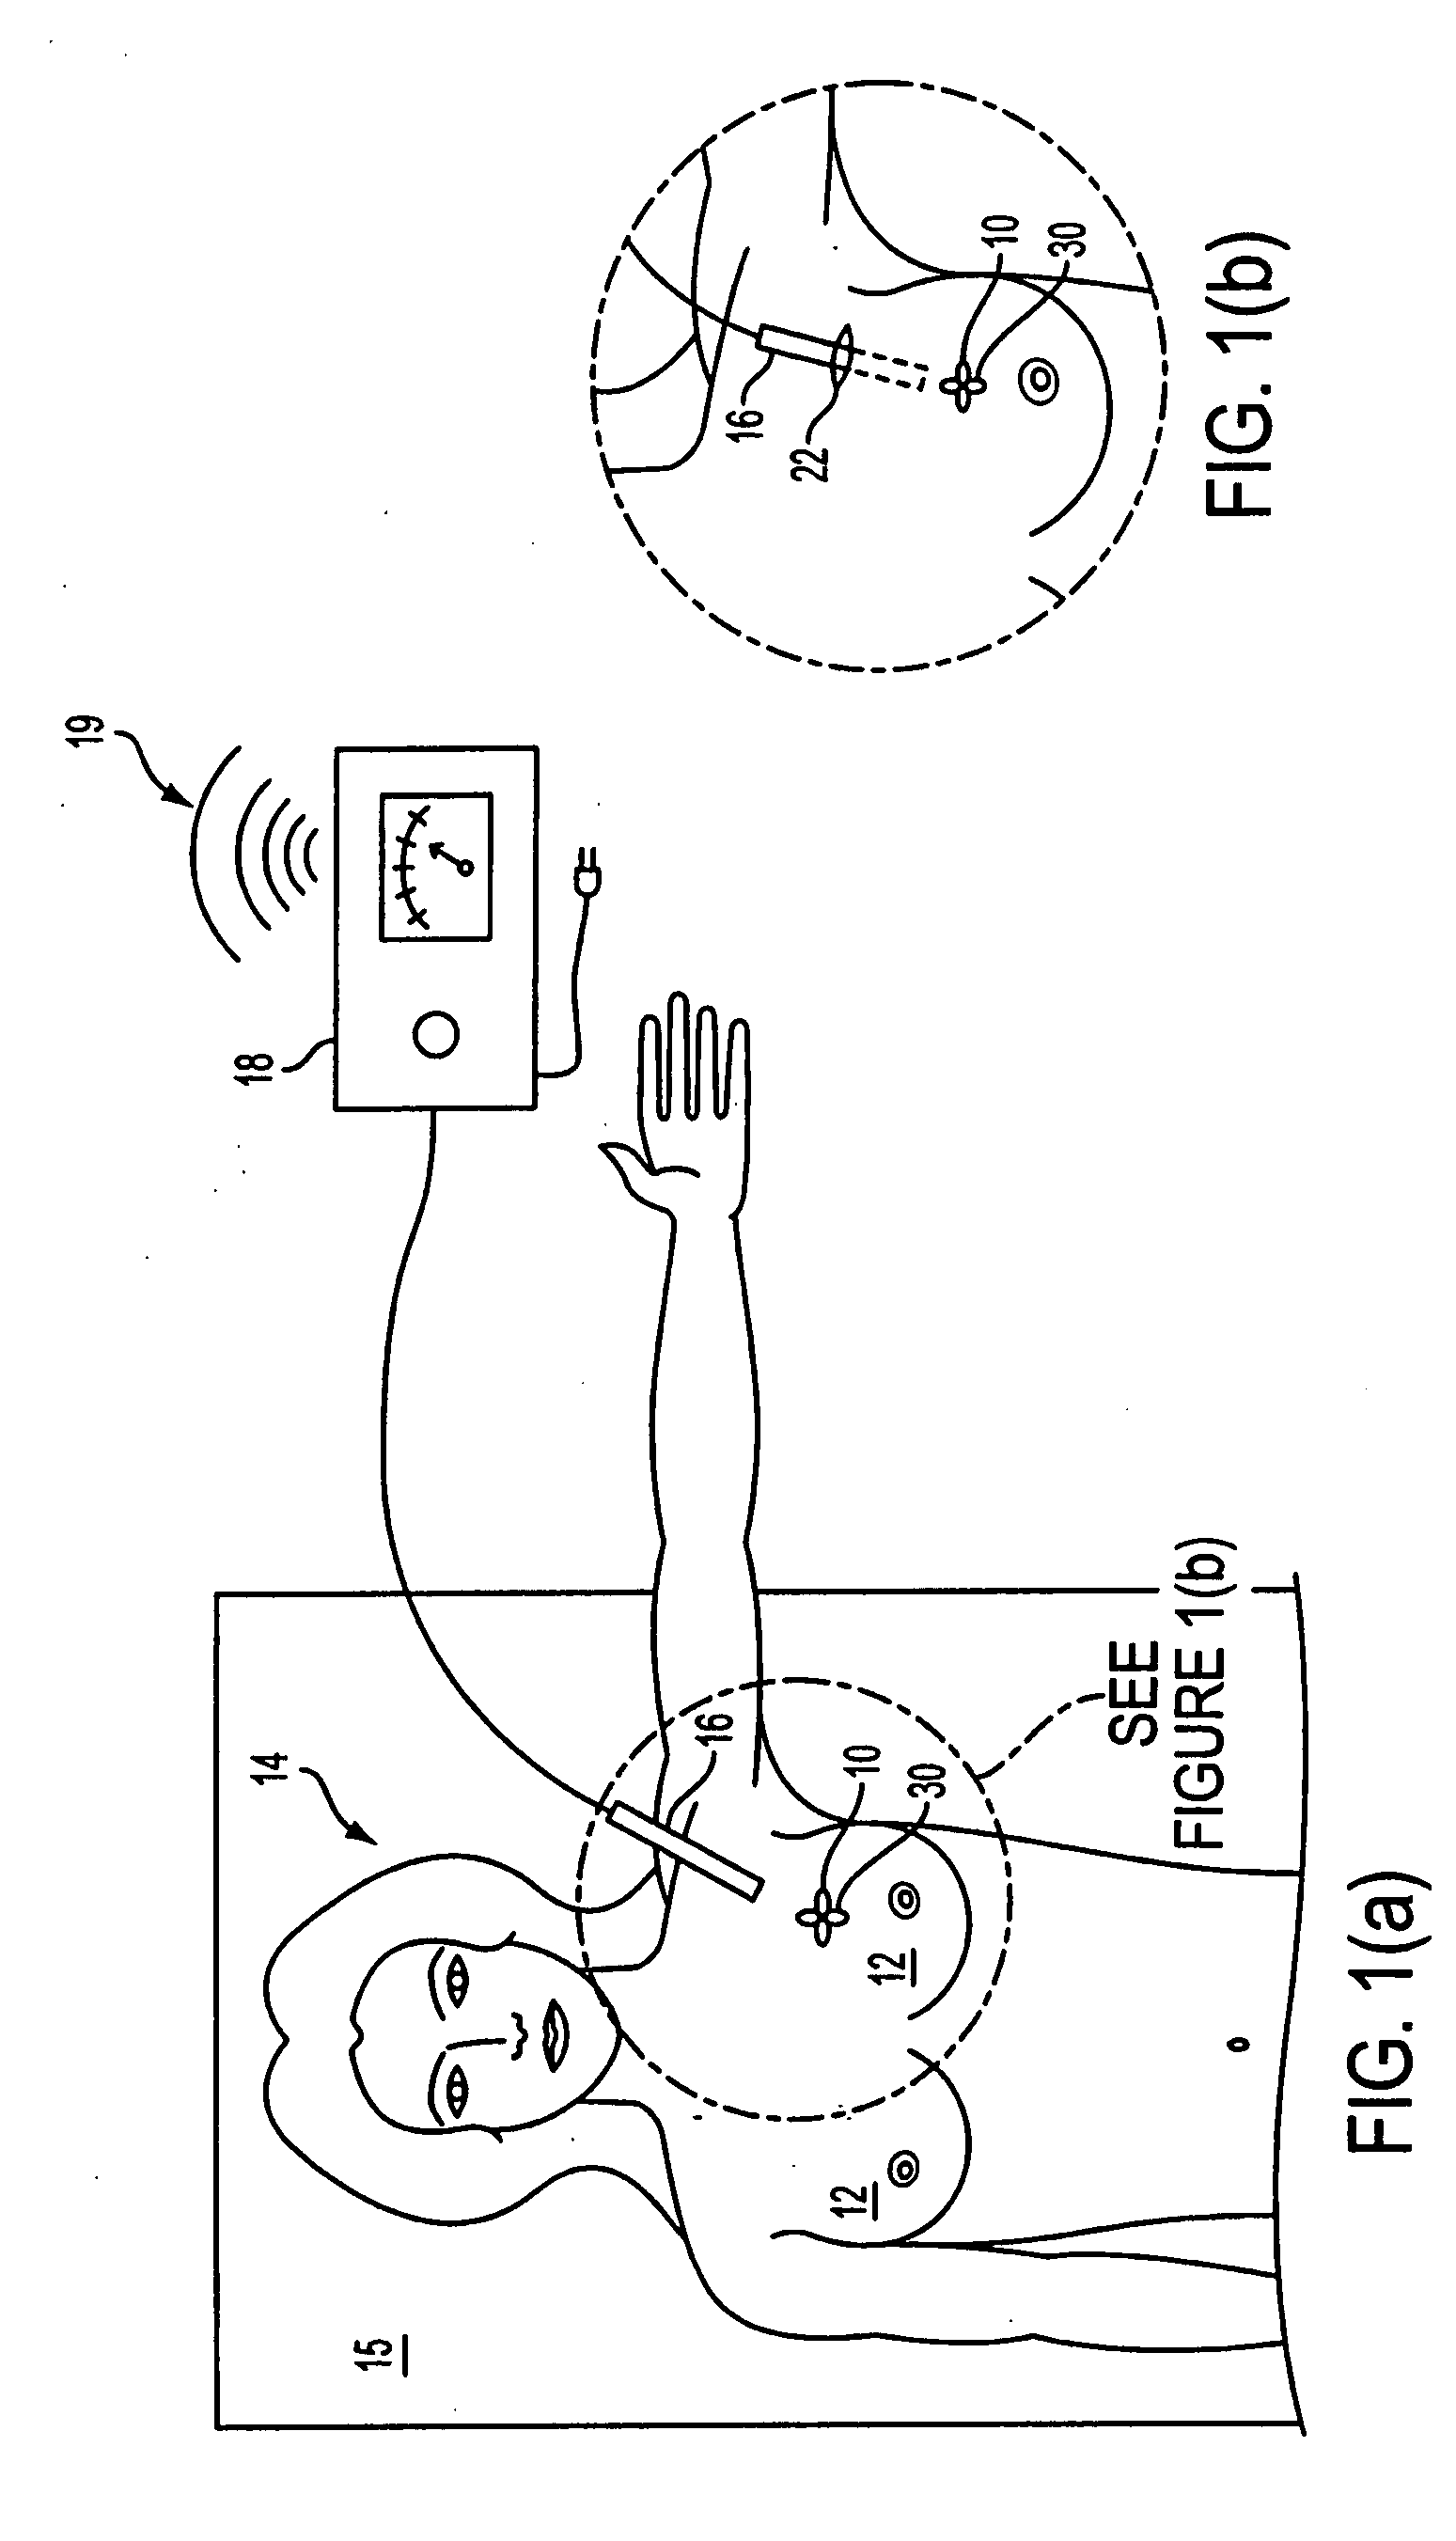 Tissue Marking Devices and Systems